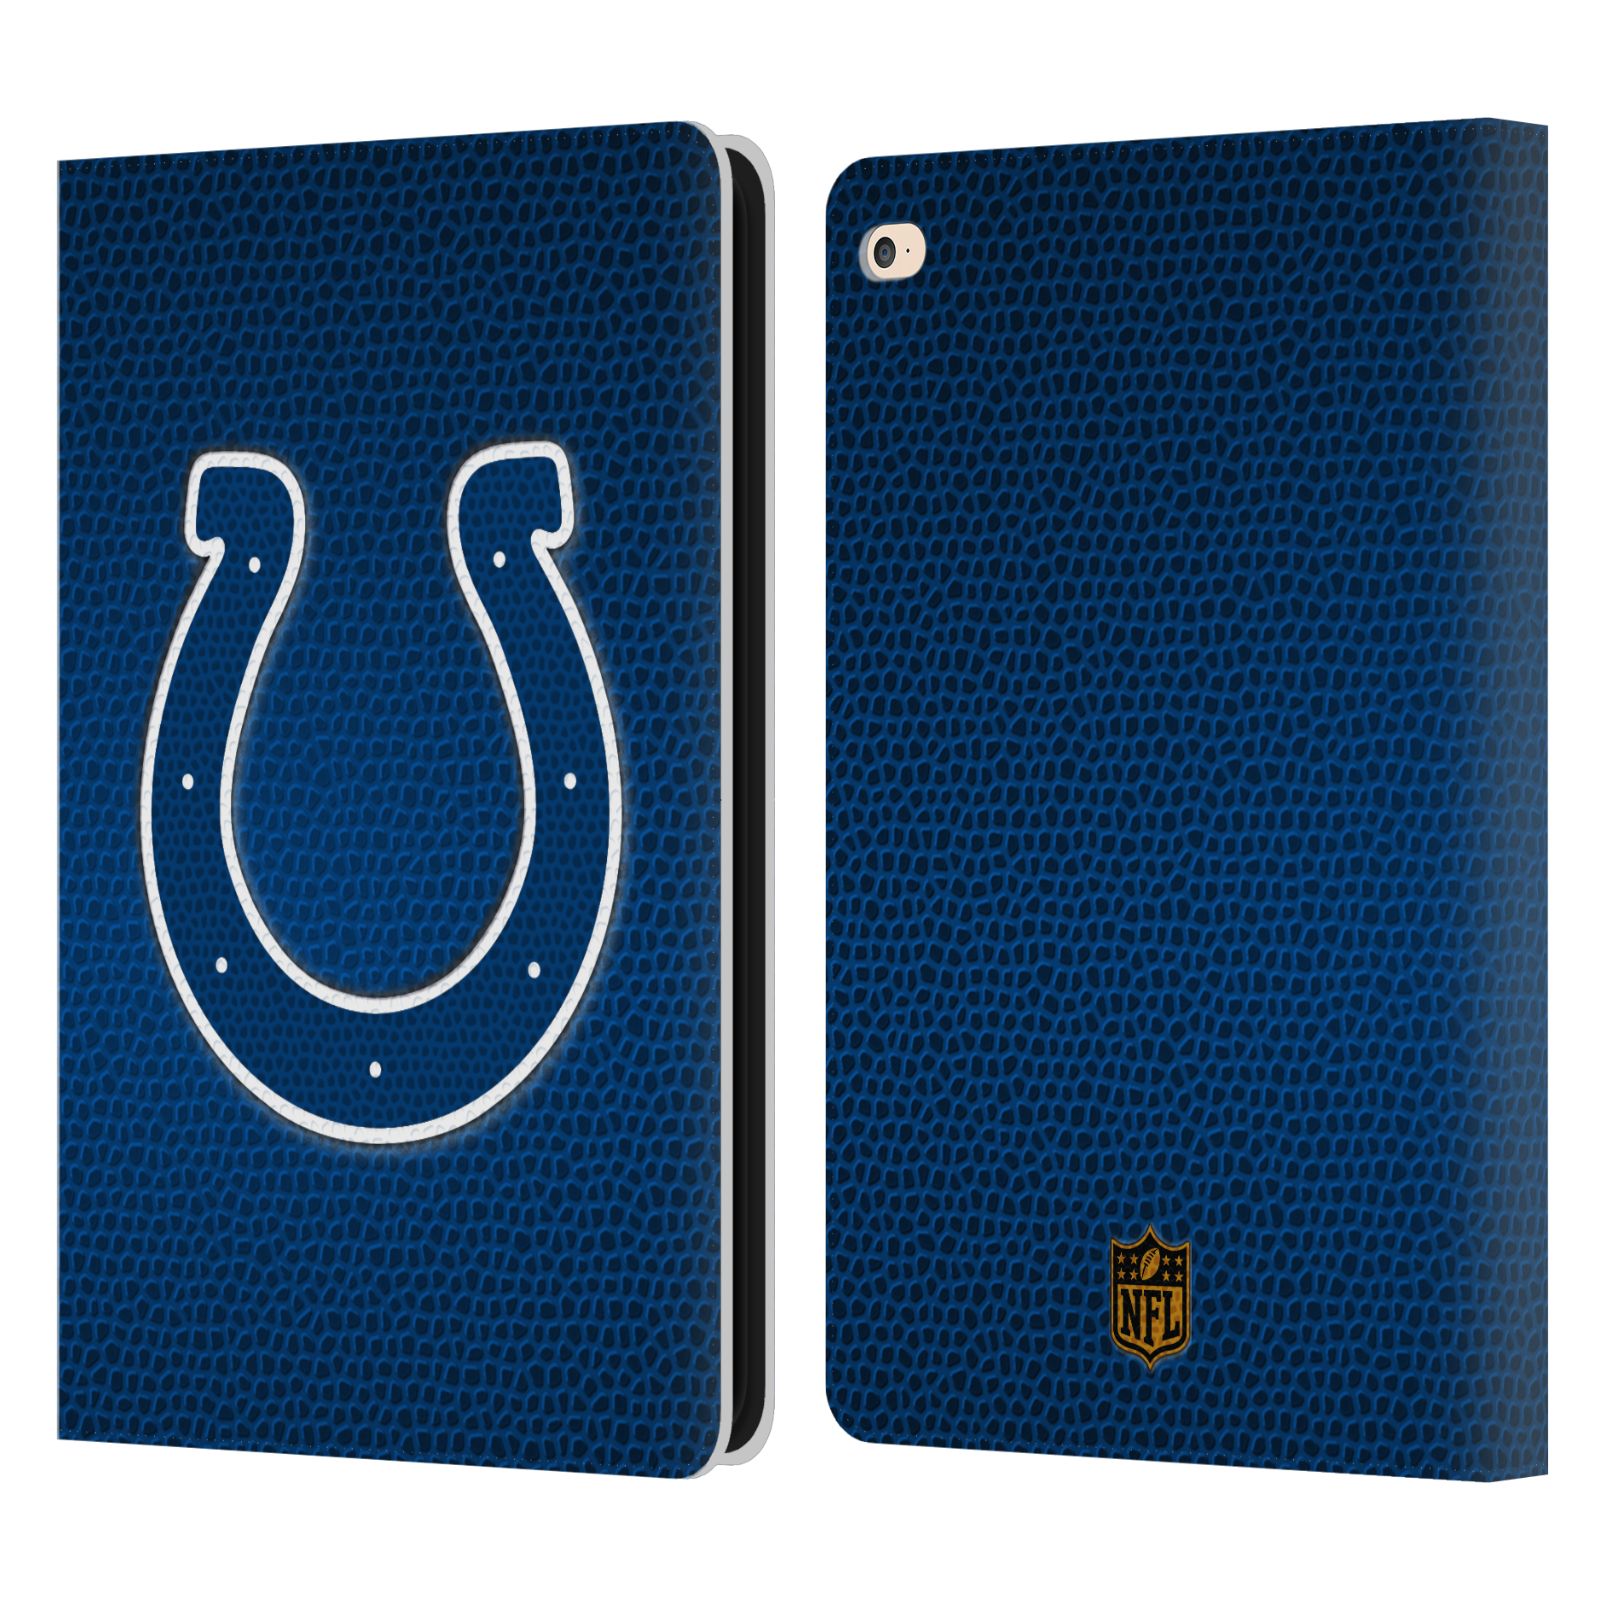 OFFICIAL NFL INDIANAPOLIS COLTS LOGO LEATHER BOOK WALLET CASE FOR APPLE iPAD | eBay